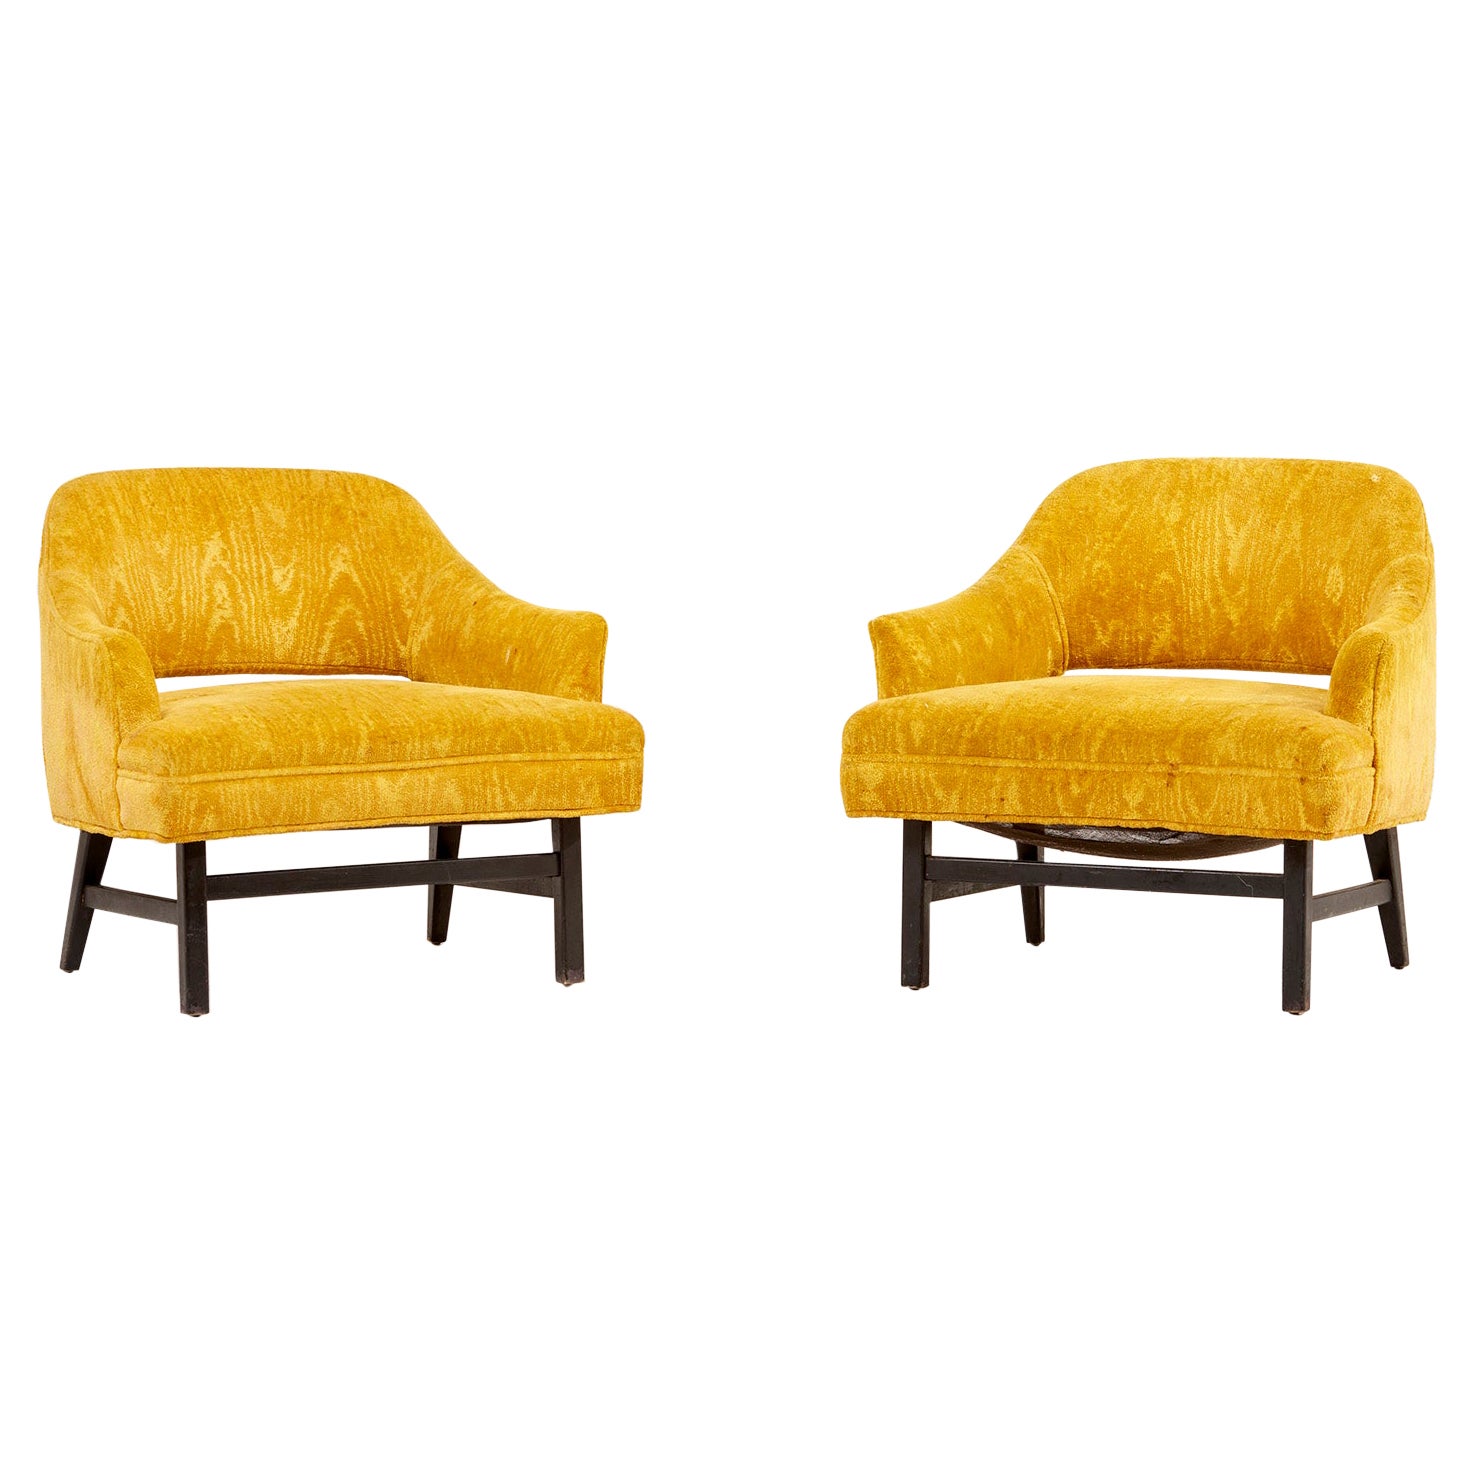 Pair of yellow Harvey Probber Lounge Chairs, USA 1960s For Sale